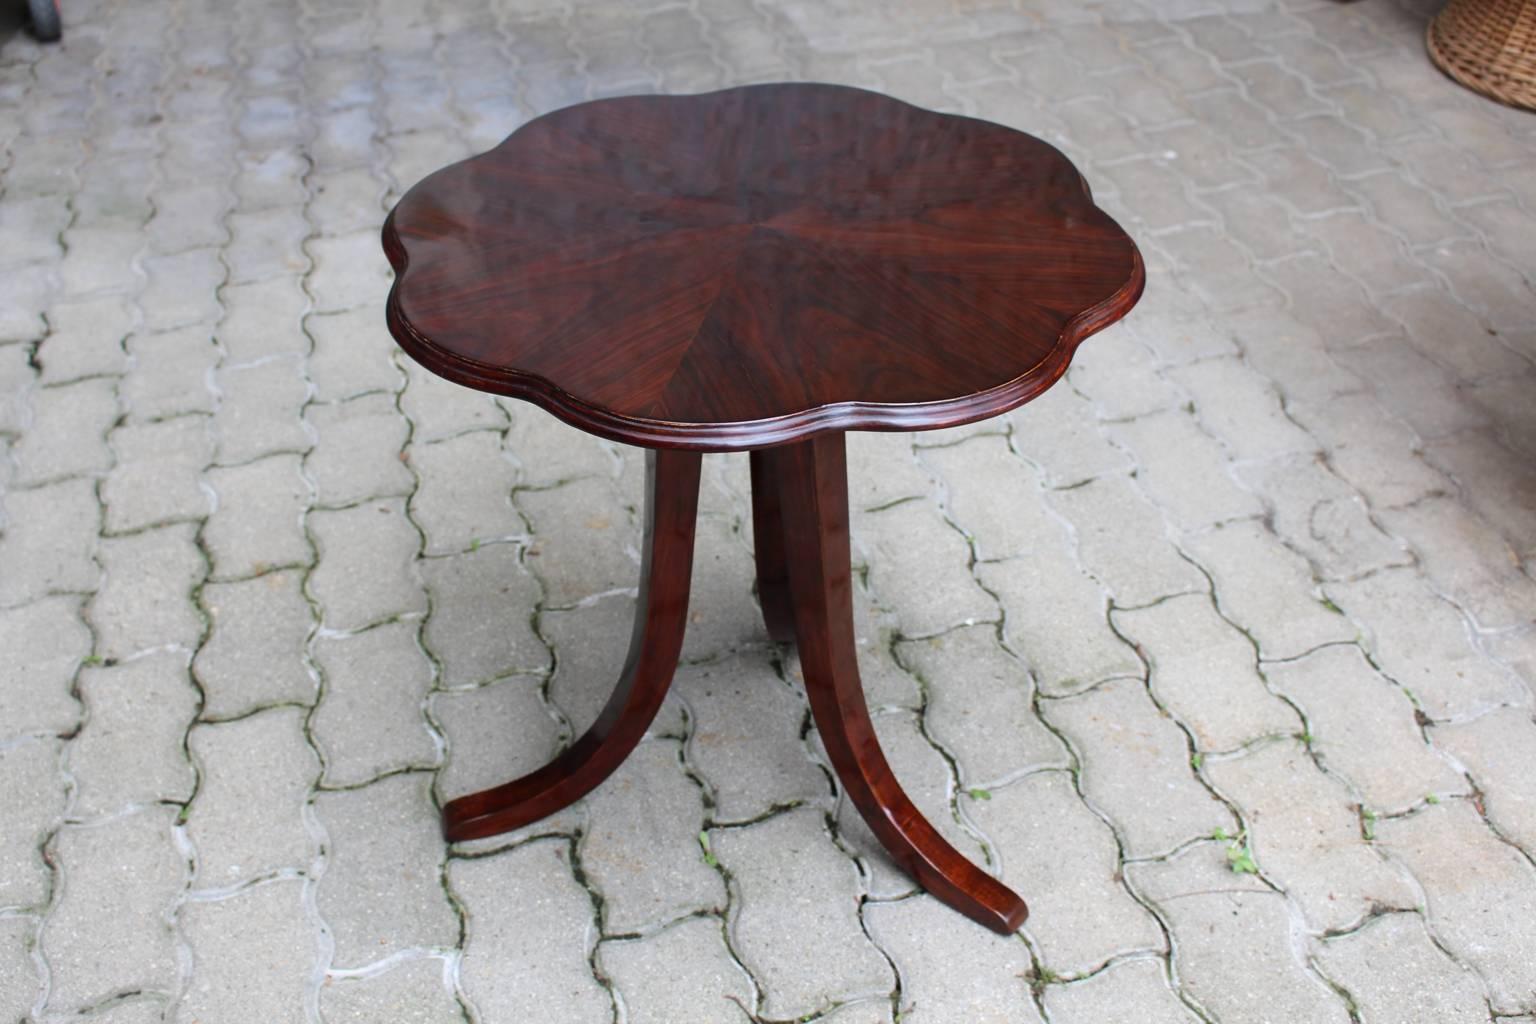 Art Deco Walnut Side Table or Coffee Table by Josef Frank for Thonet, circa 1925
A charming Art Deco side table by Josef Frank for Thonet Vienna from walnut in amazing shape.
The coffee table shows the company´s name Thonet as branding underneath